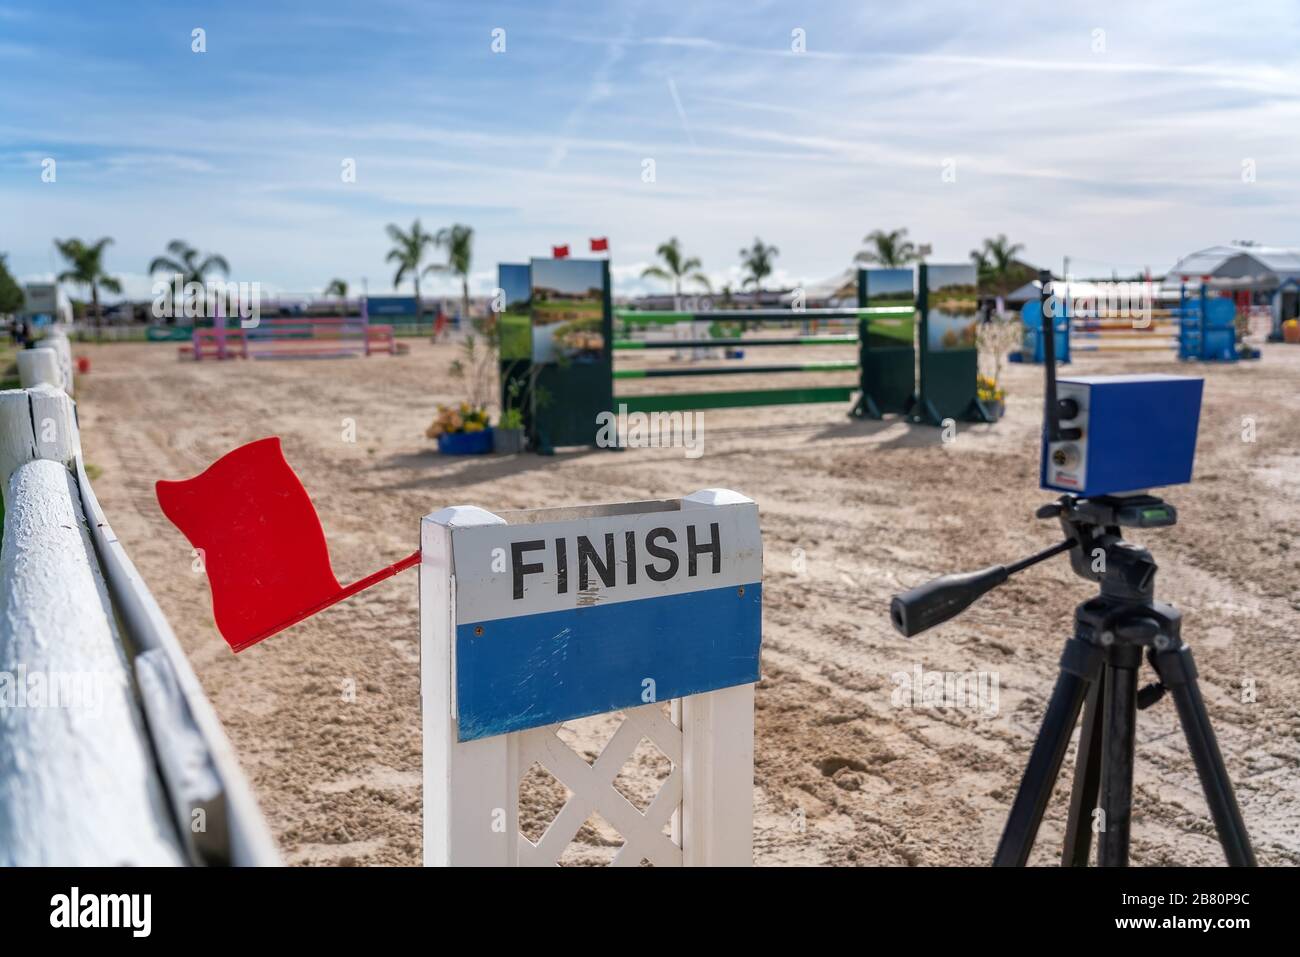 A device with a red flag for registering the finish line in equestrian racing at the racetrack Stock Photo